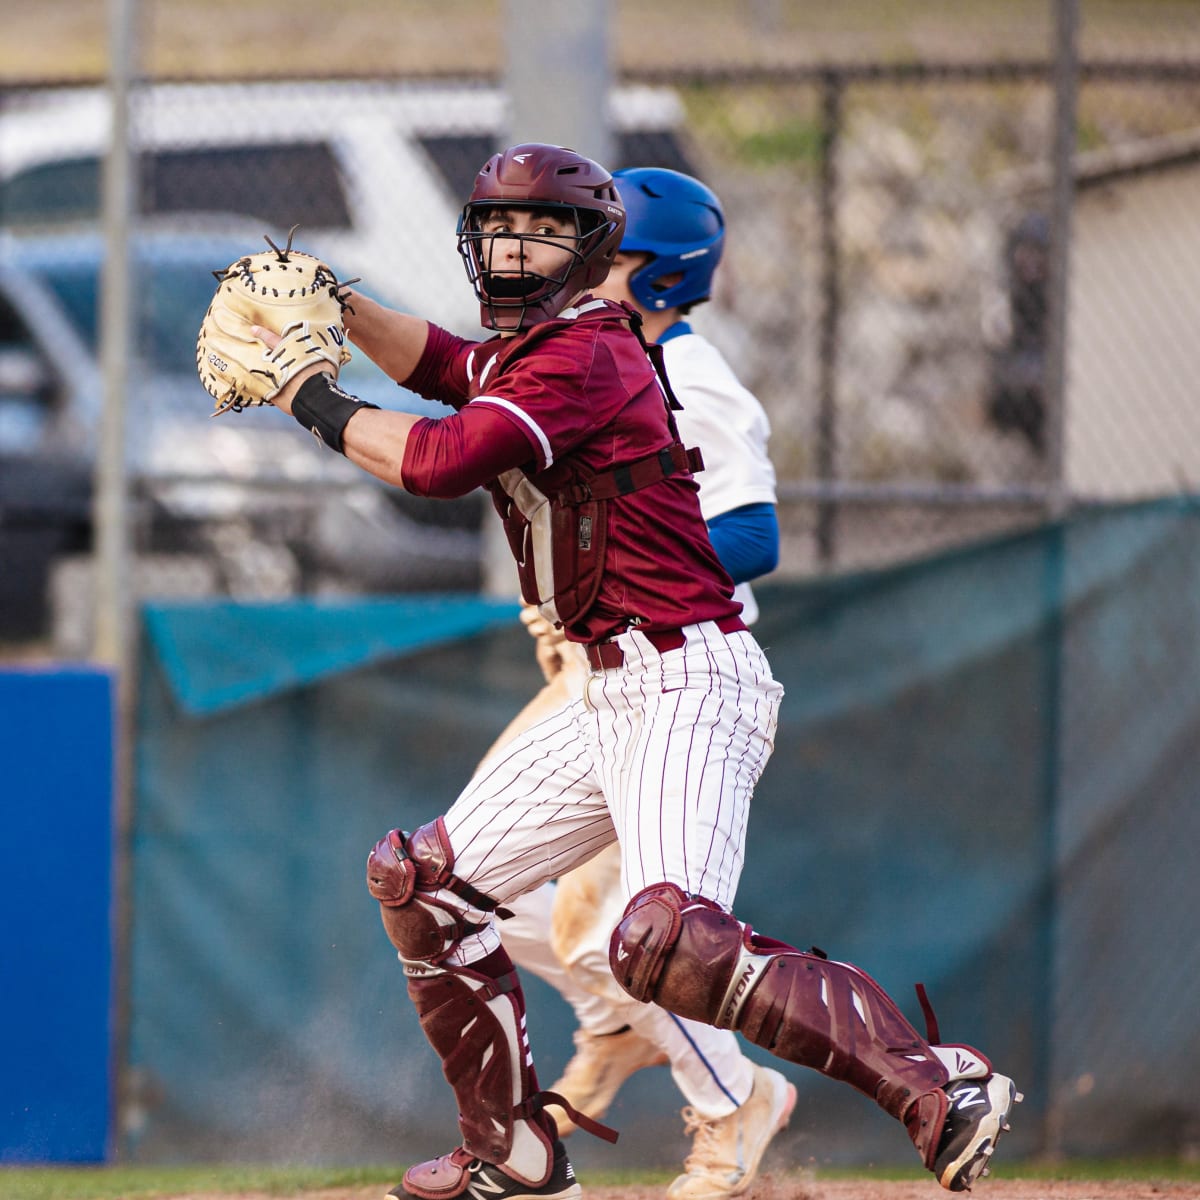 Arkansas' best high school baseball players: Meet the state's top catchers  - Sports Illustrated High School News, Analysis and More